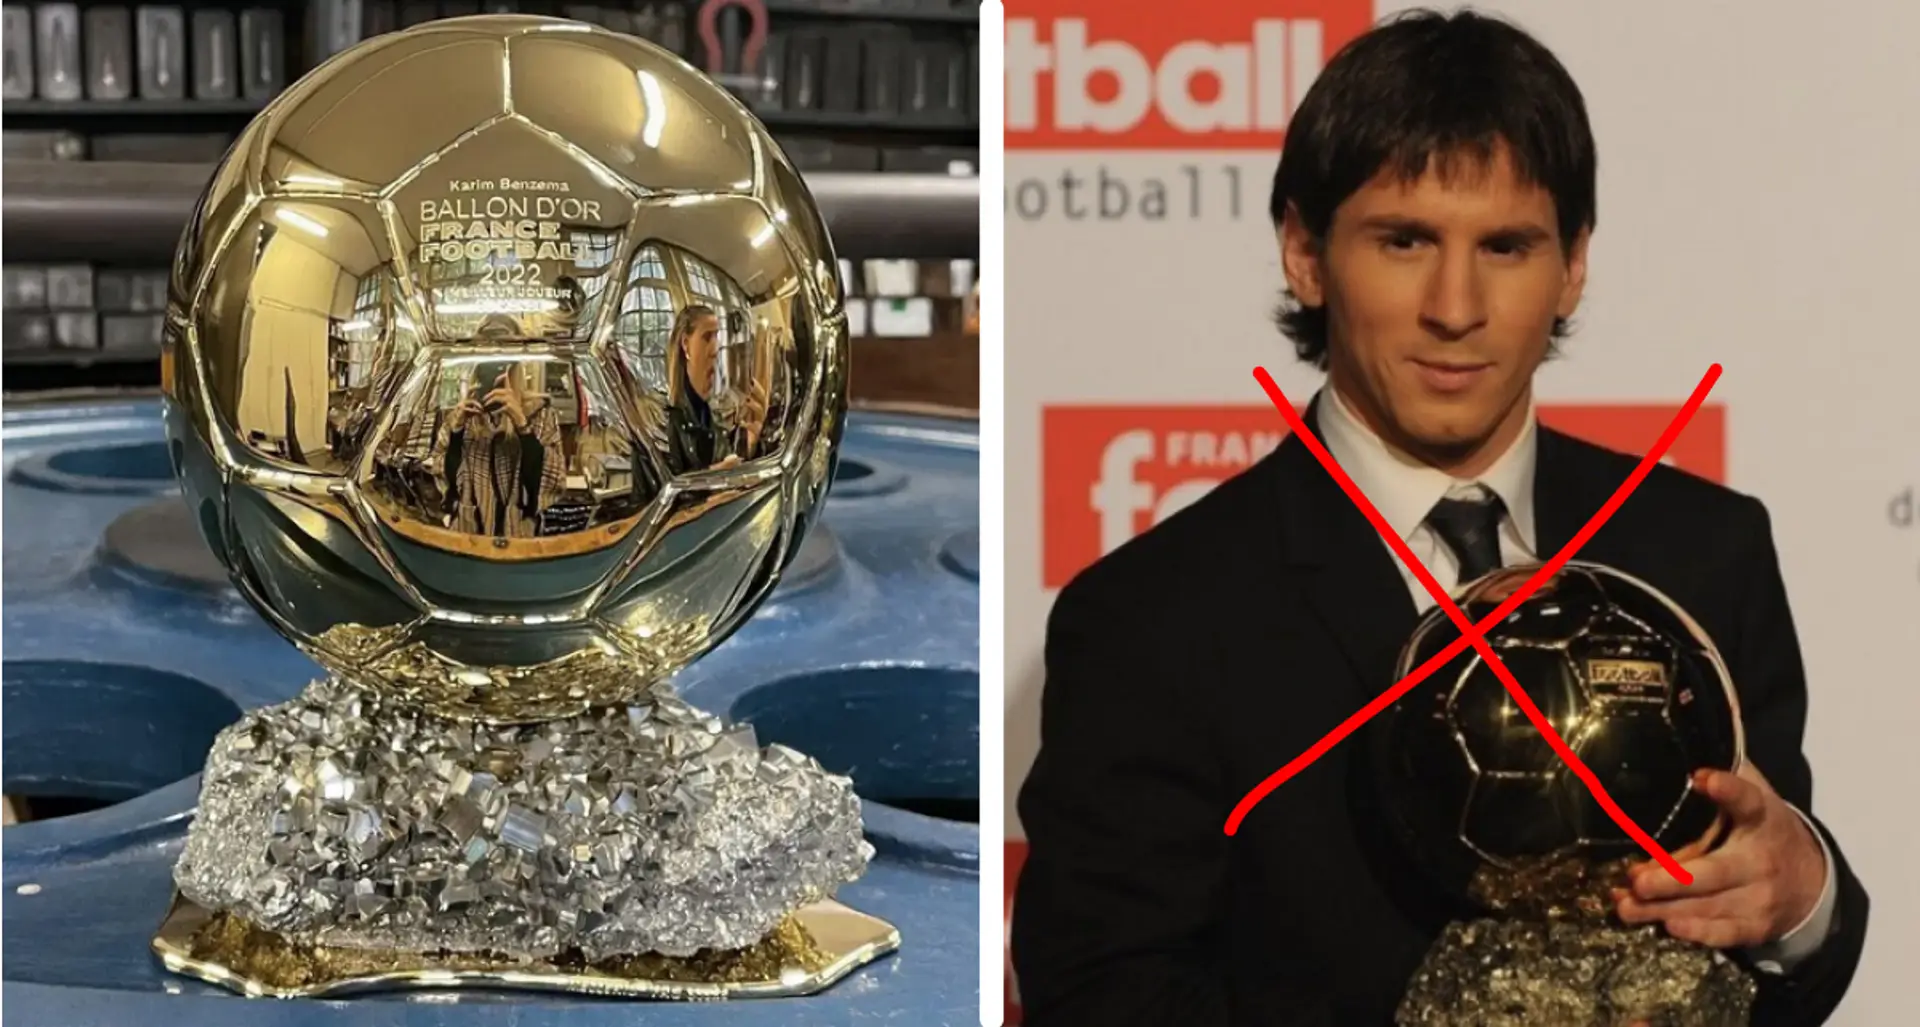 Youngest-ever Ballon d'Or winner was from Barca – not Messi